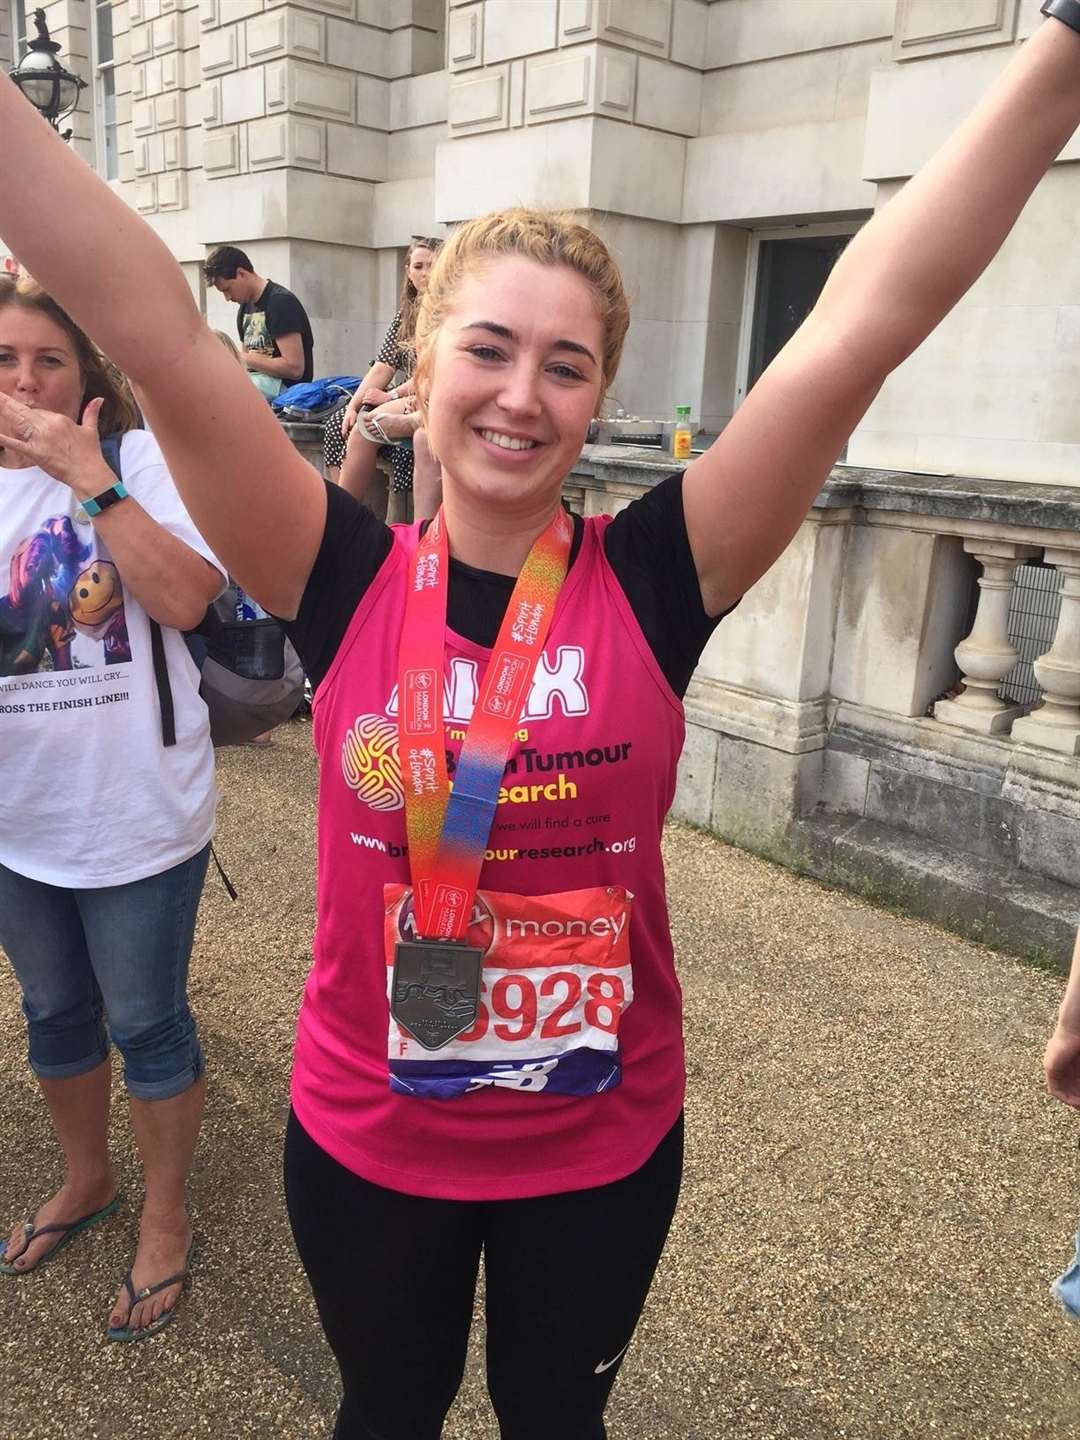 Alexandria Broad-Surry, 23, from Greenhithe, who completed the marathon after losing a close friend to brain cancer